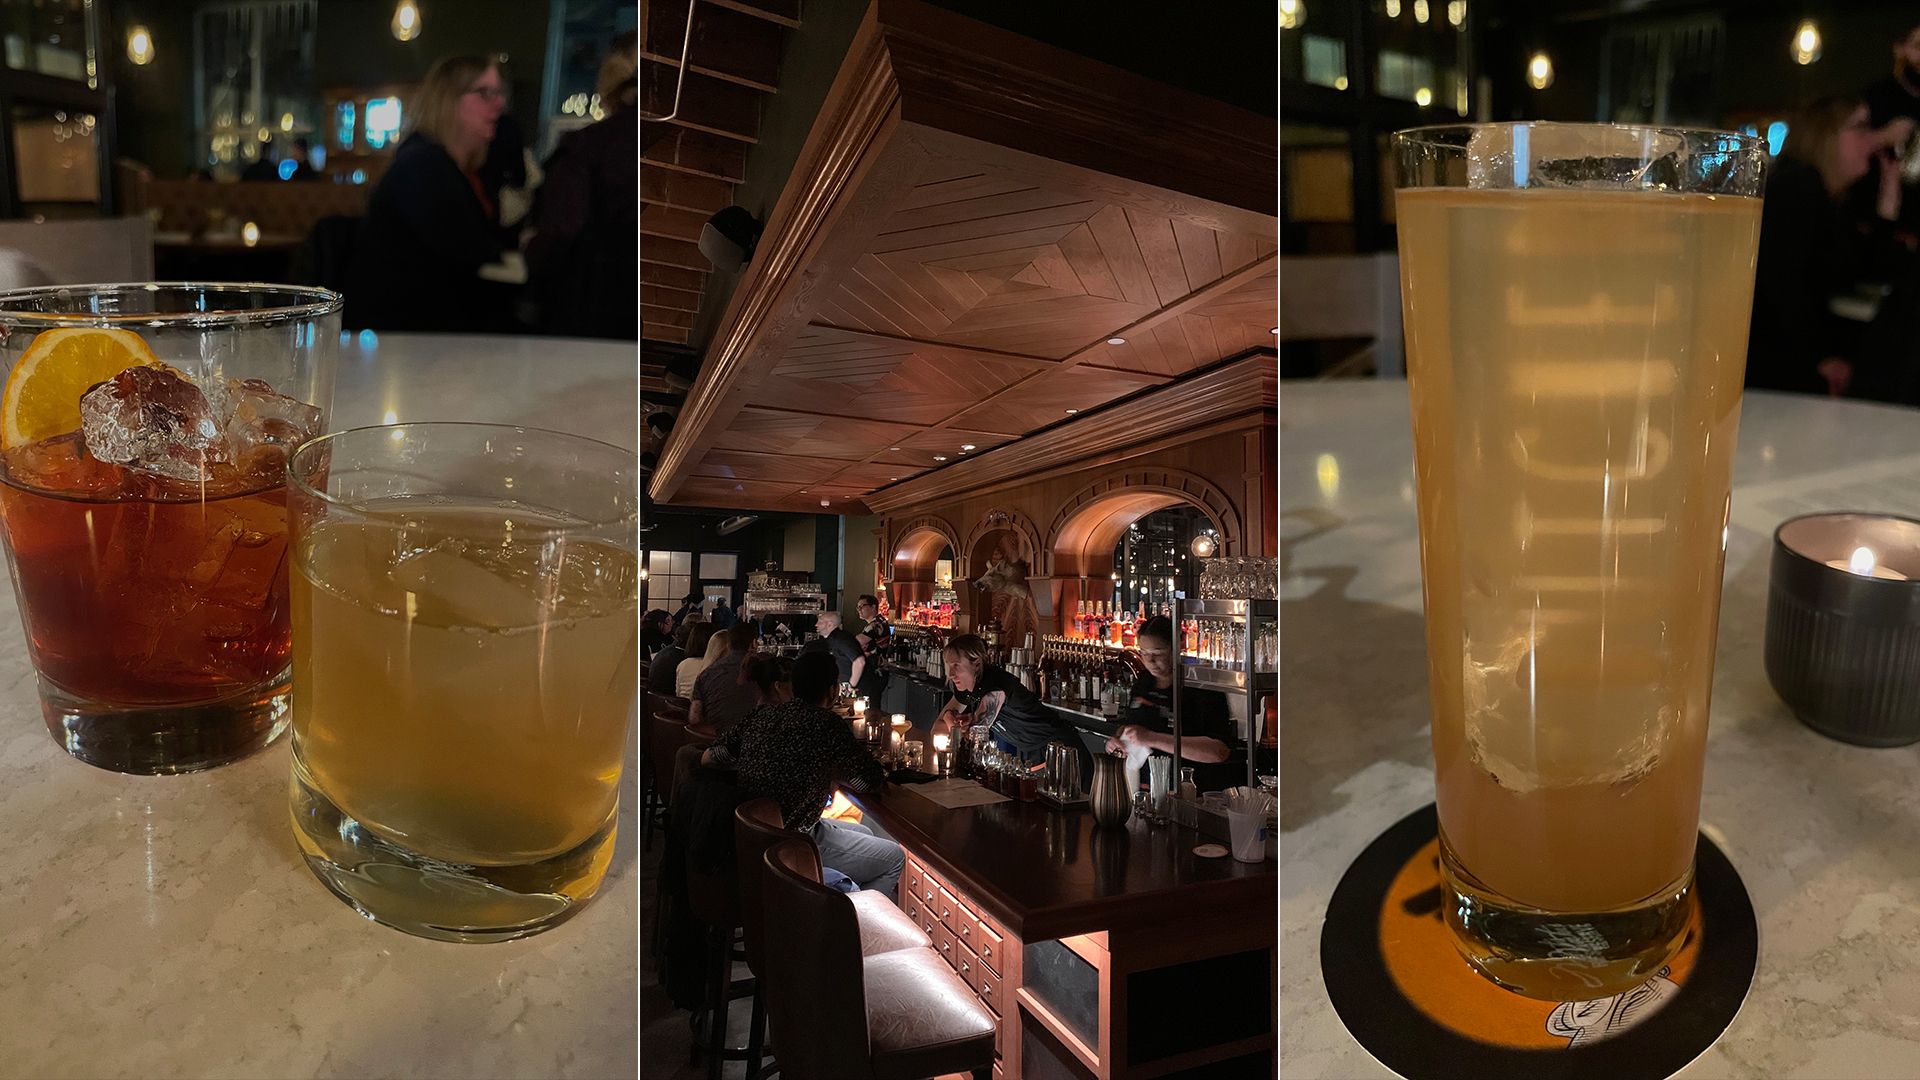 Photos of two cocktails and a wooden bar.